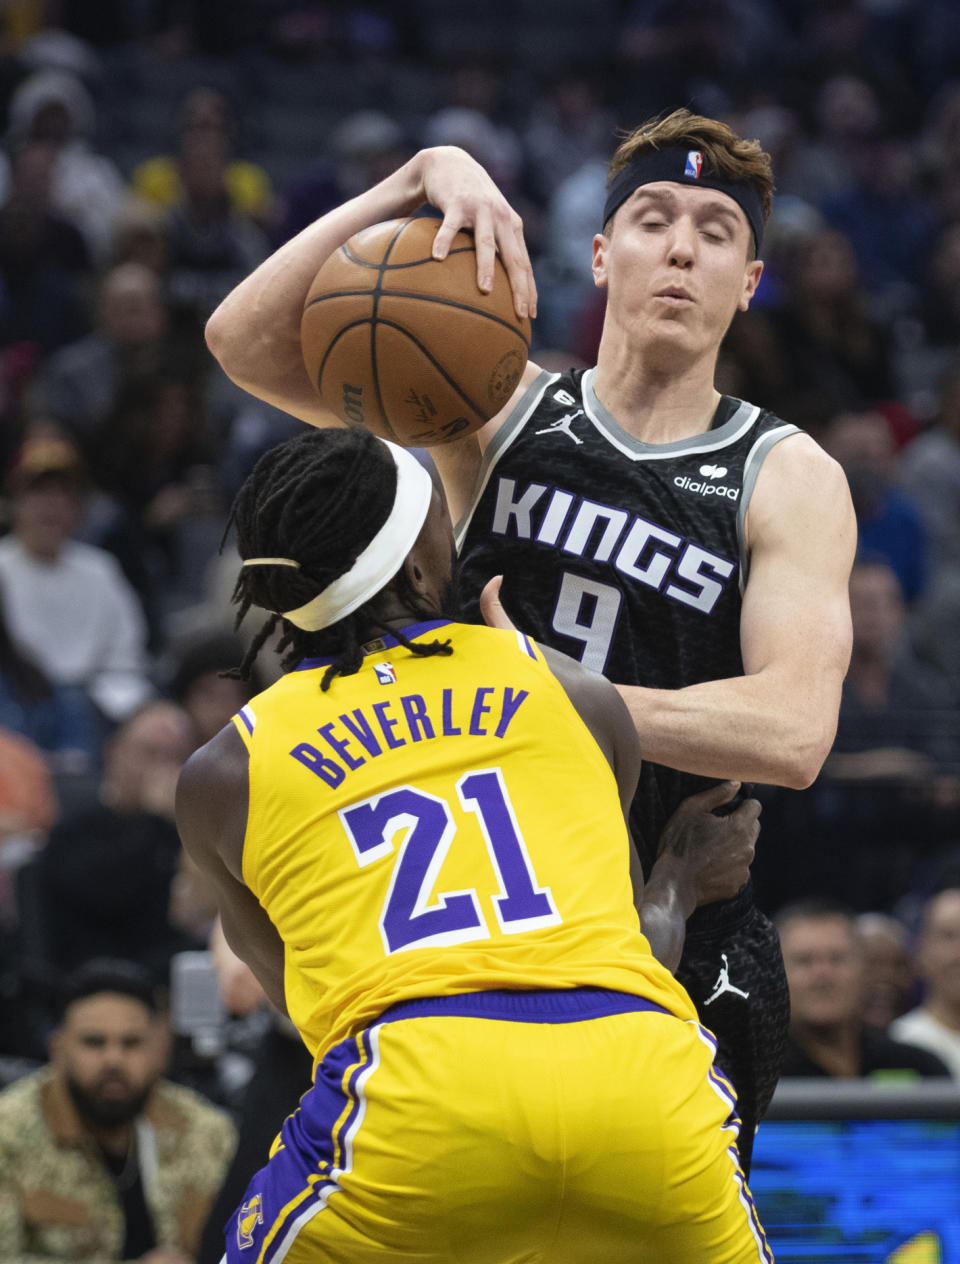 Sacramento Kings guard Kevin Huerter (9) is fouled by Los Angeles Lakers guard Patrick Beverley (21) during the first quarter of an NBA basketball game in Sacramento, Calif., Wednesday, Dec. 21, 2022. (AP Photo/José Luis Villegas)